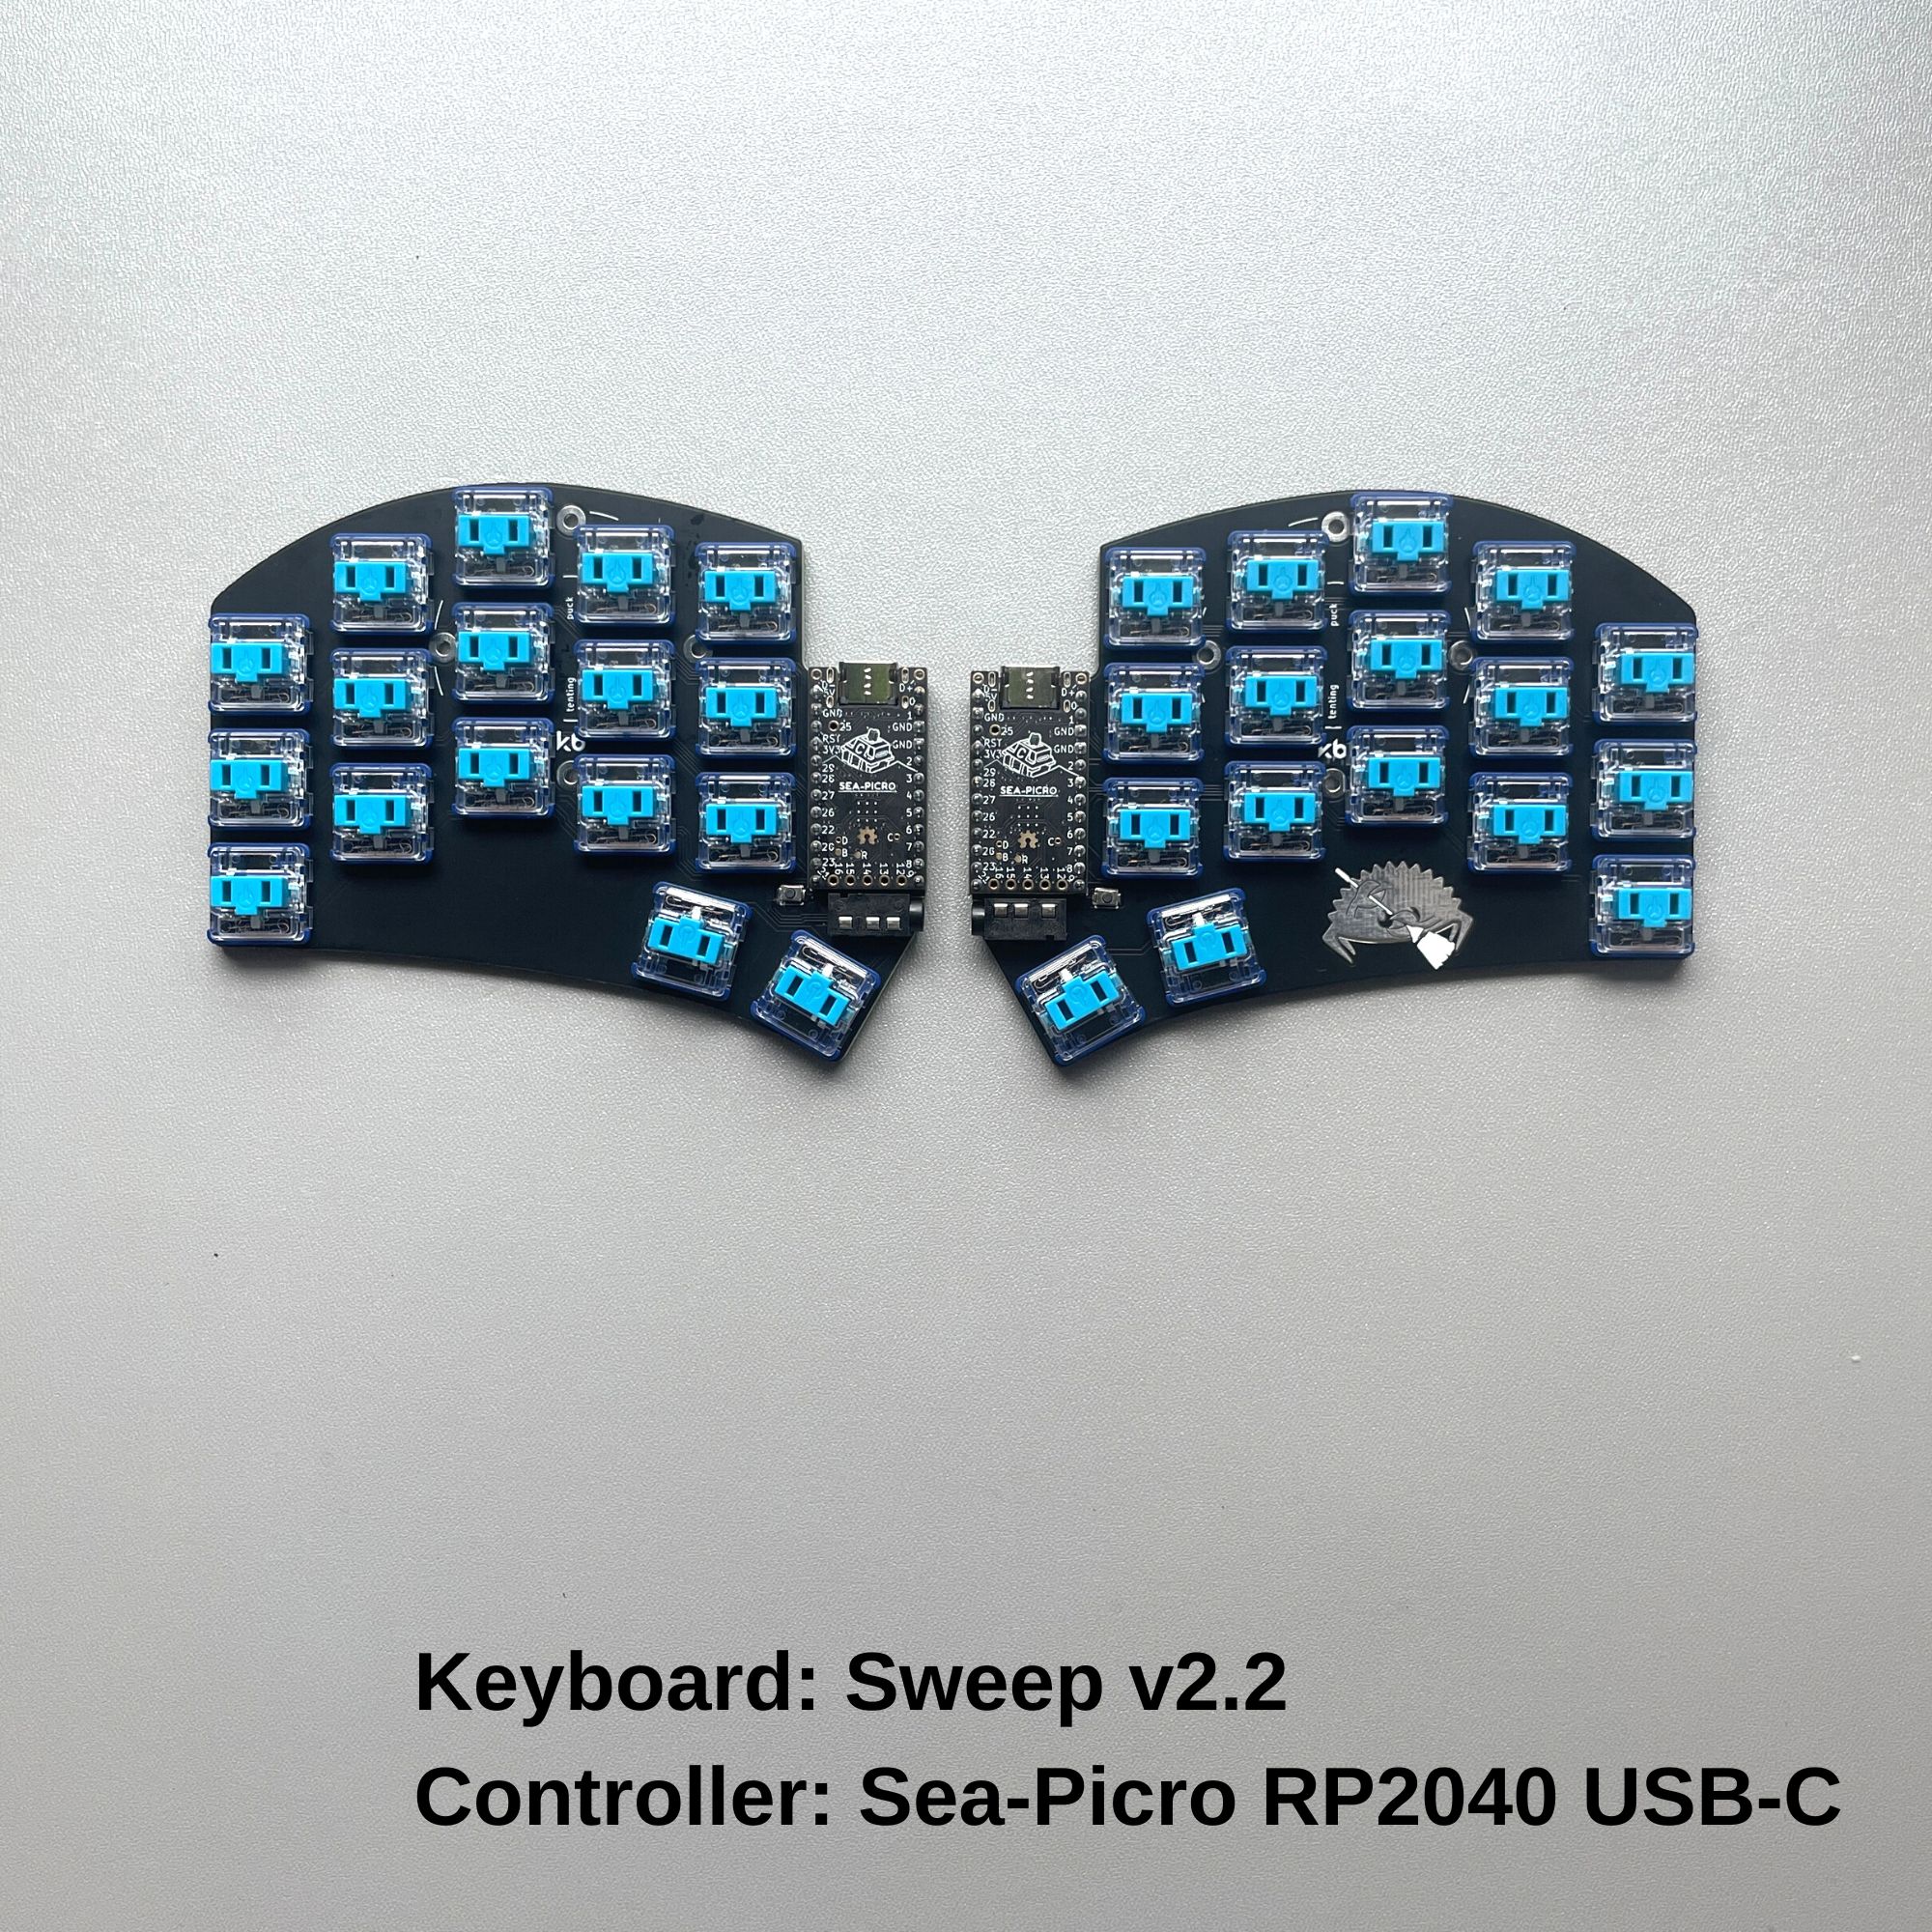 Sweep v2.2 with Sea-Picro RP2040 Controller